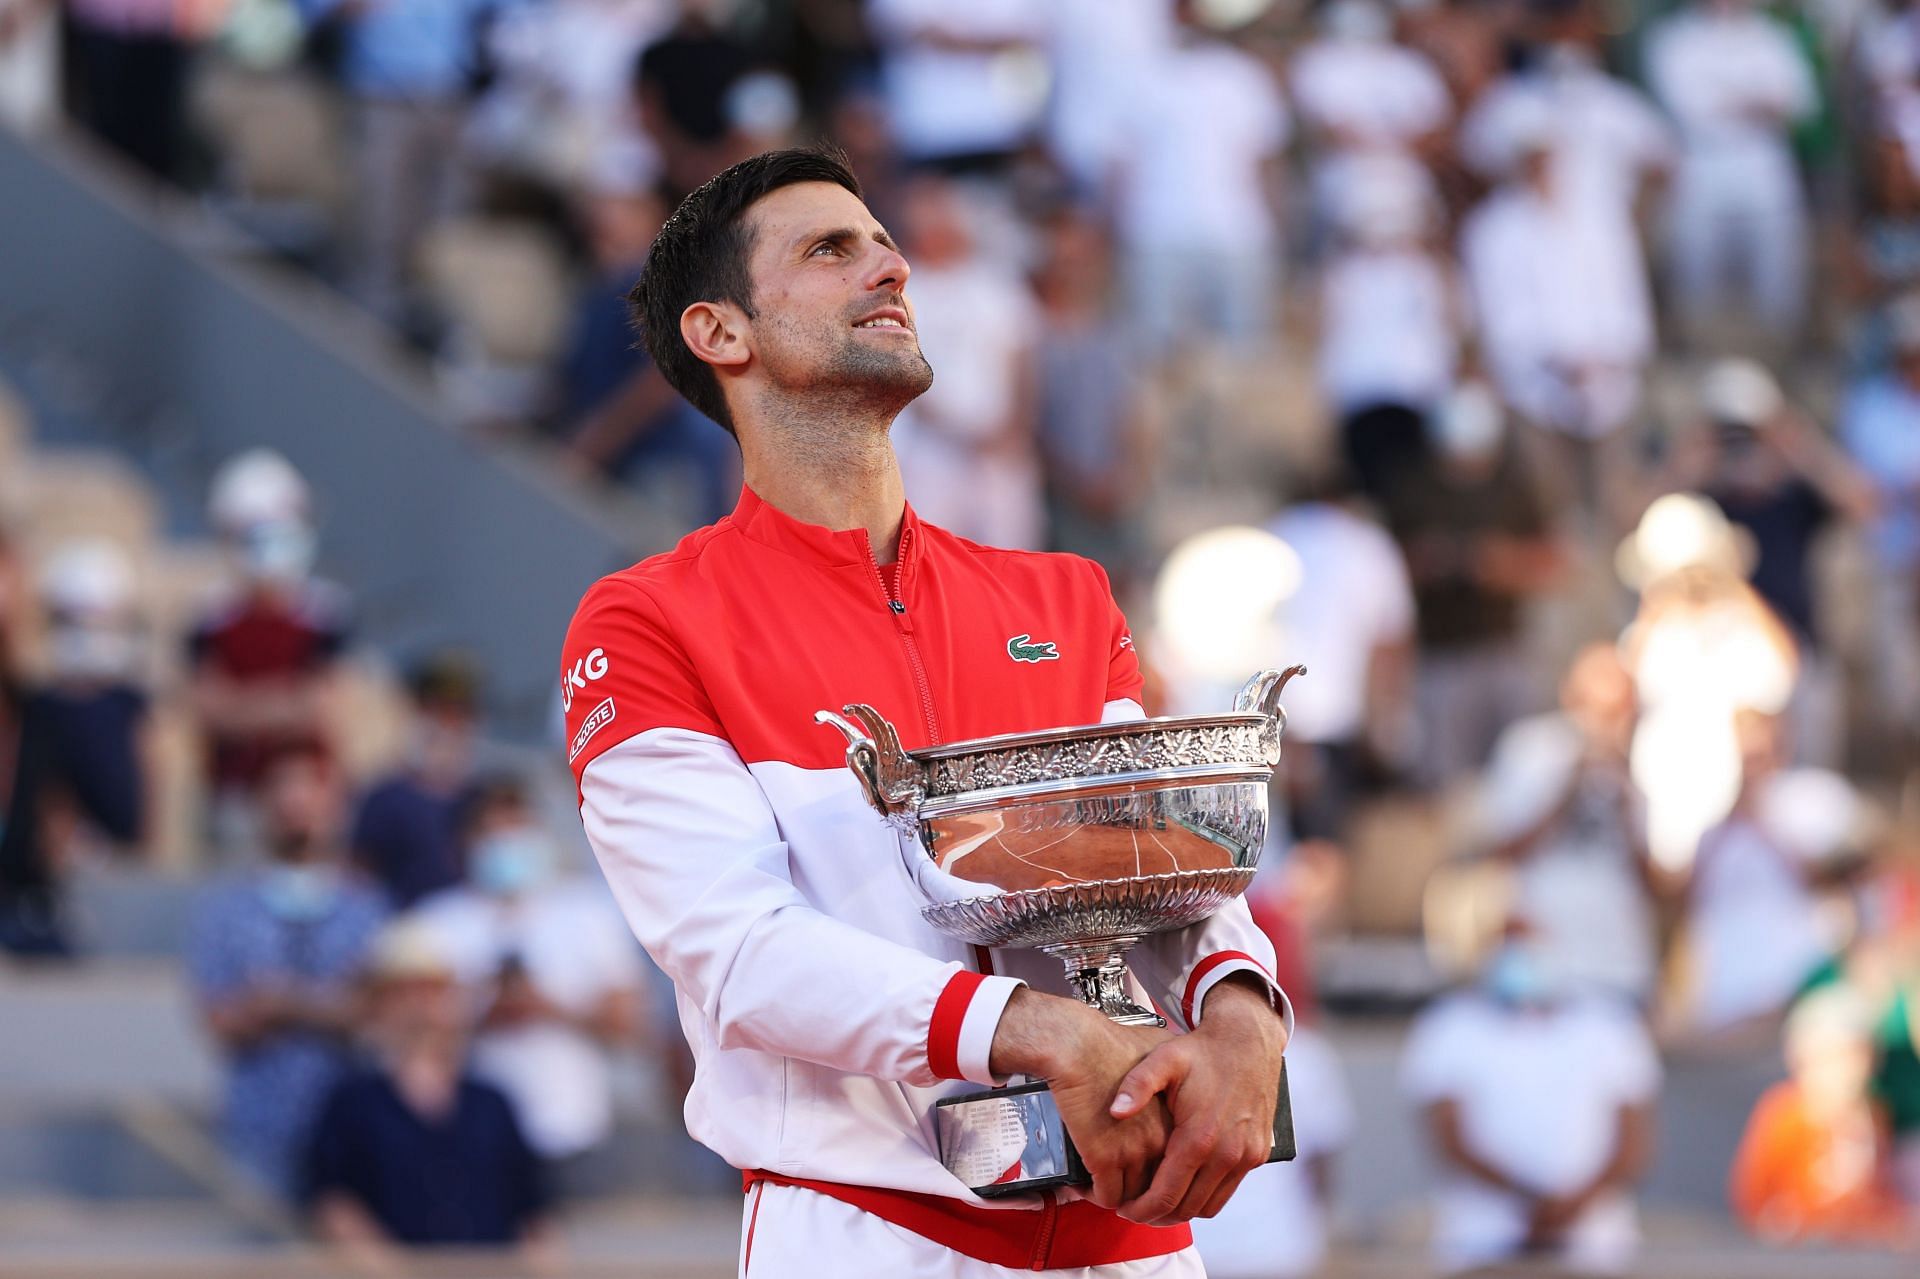 Novak Djokovic is a two-time champion at the Monte-Carlo Masters.